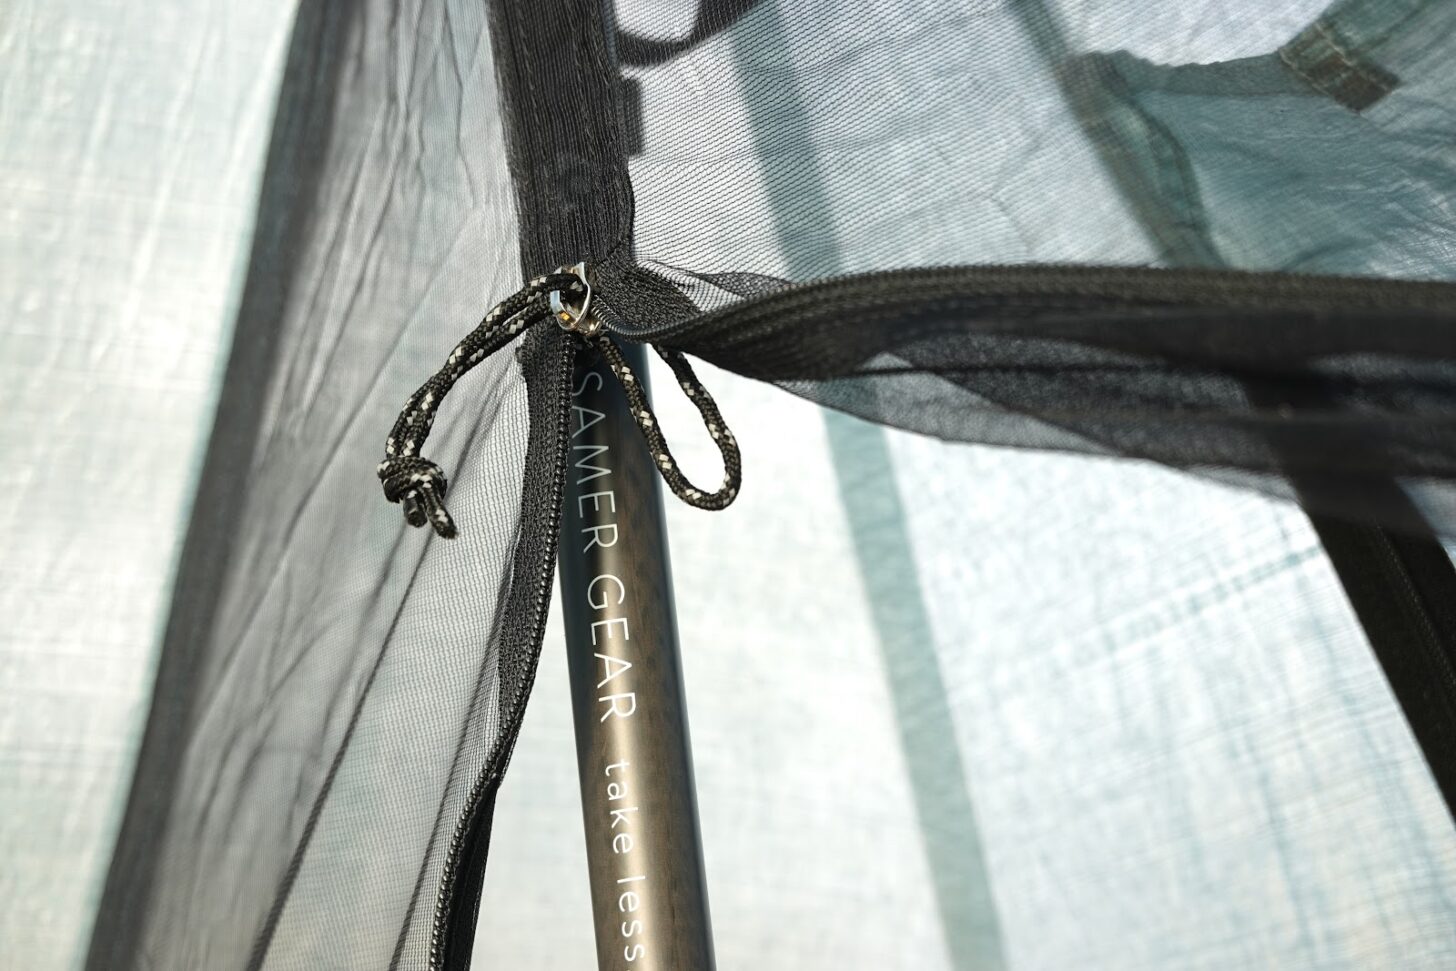 a close-up of the zipper on the durston x-mid pro 2